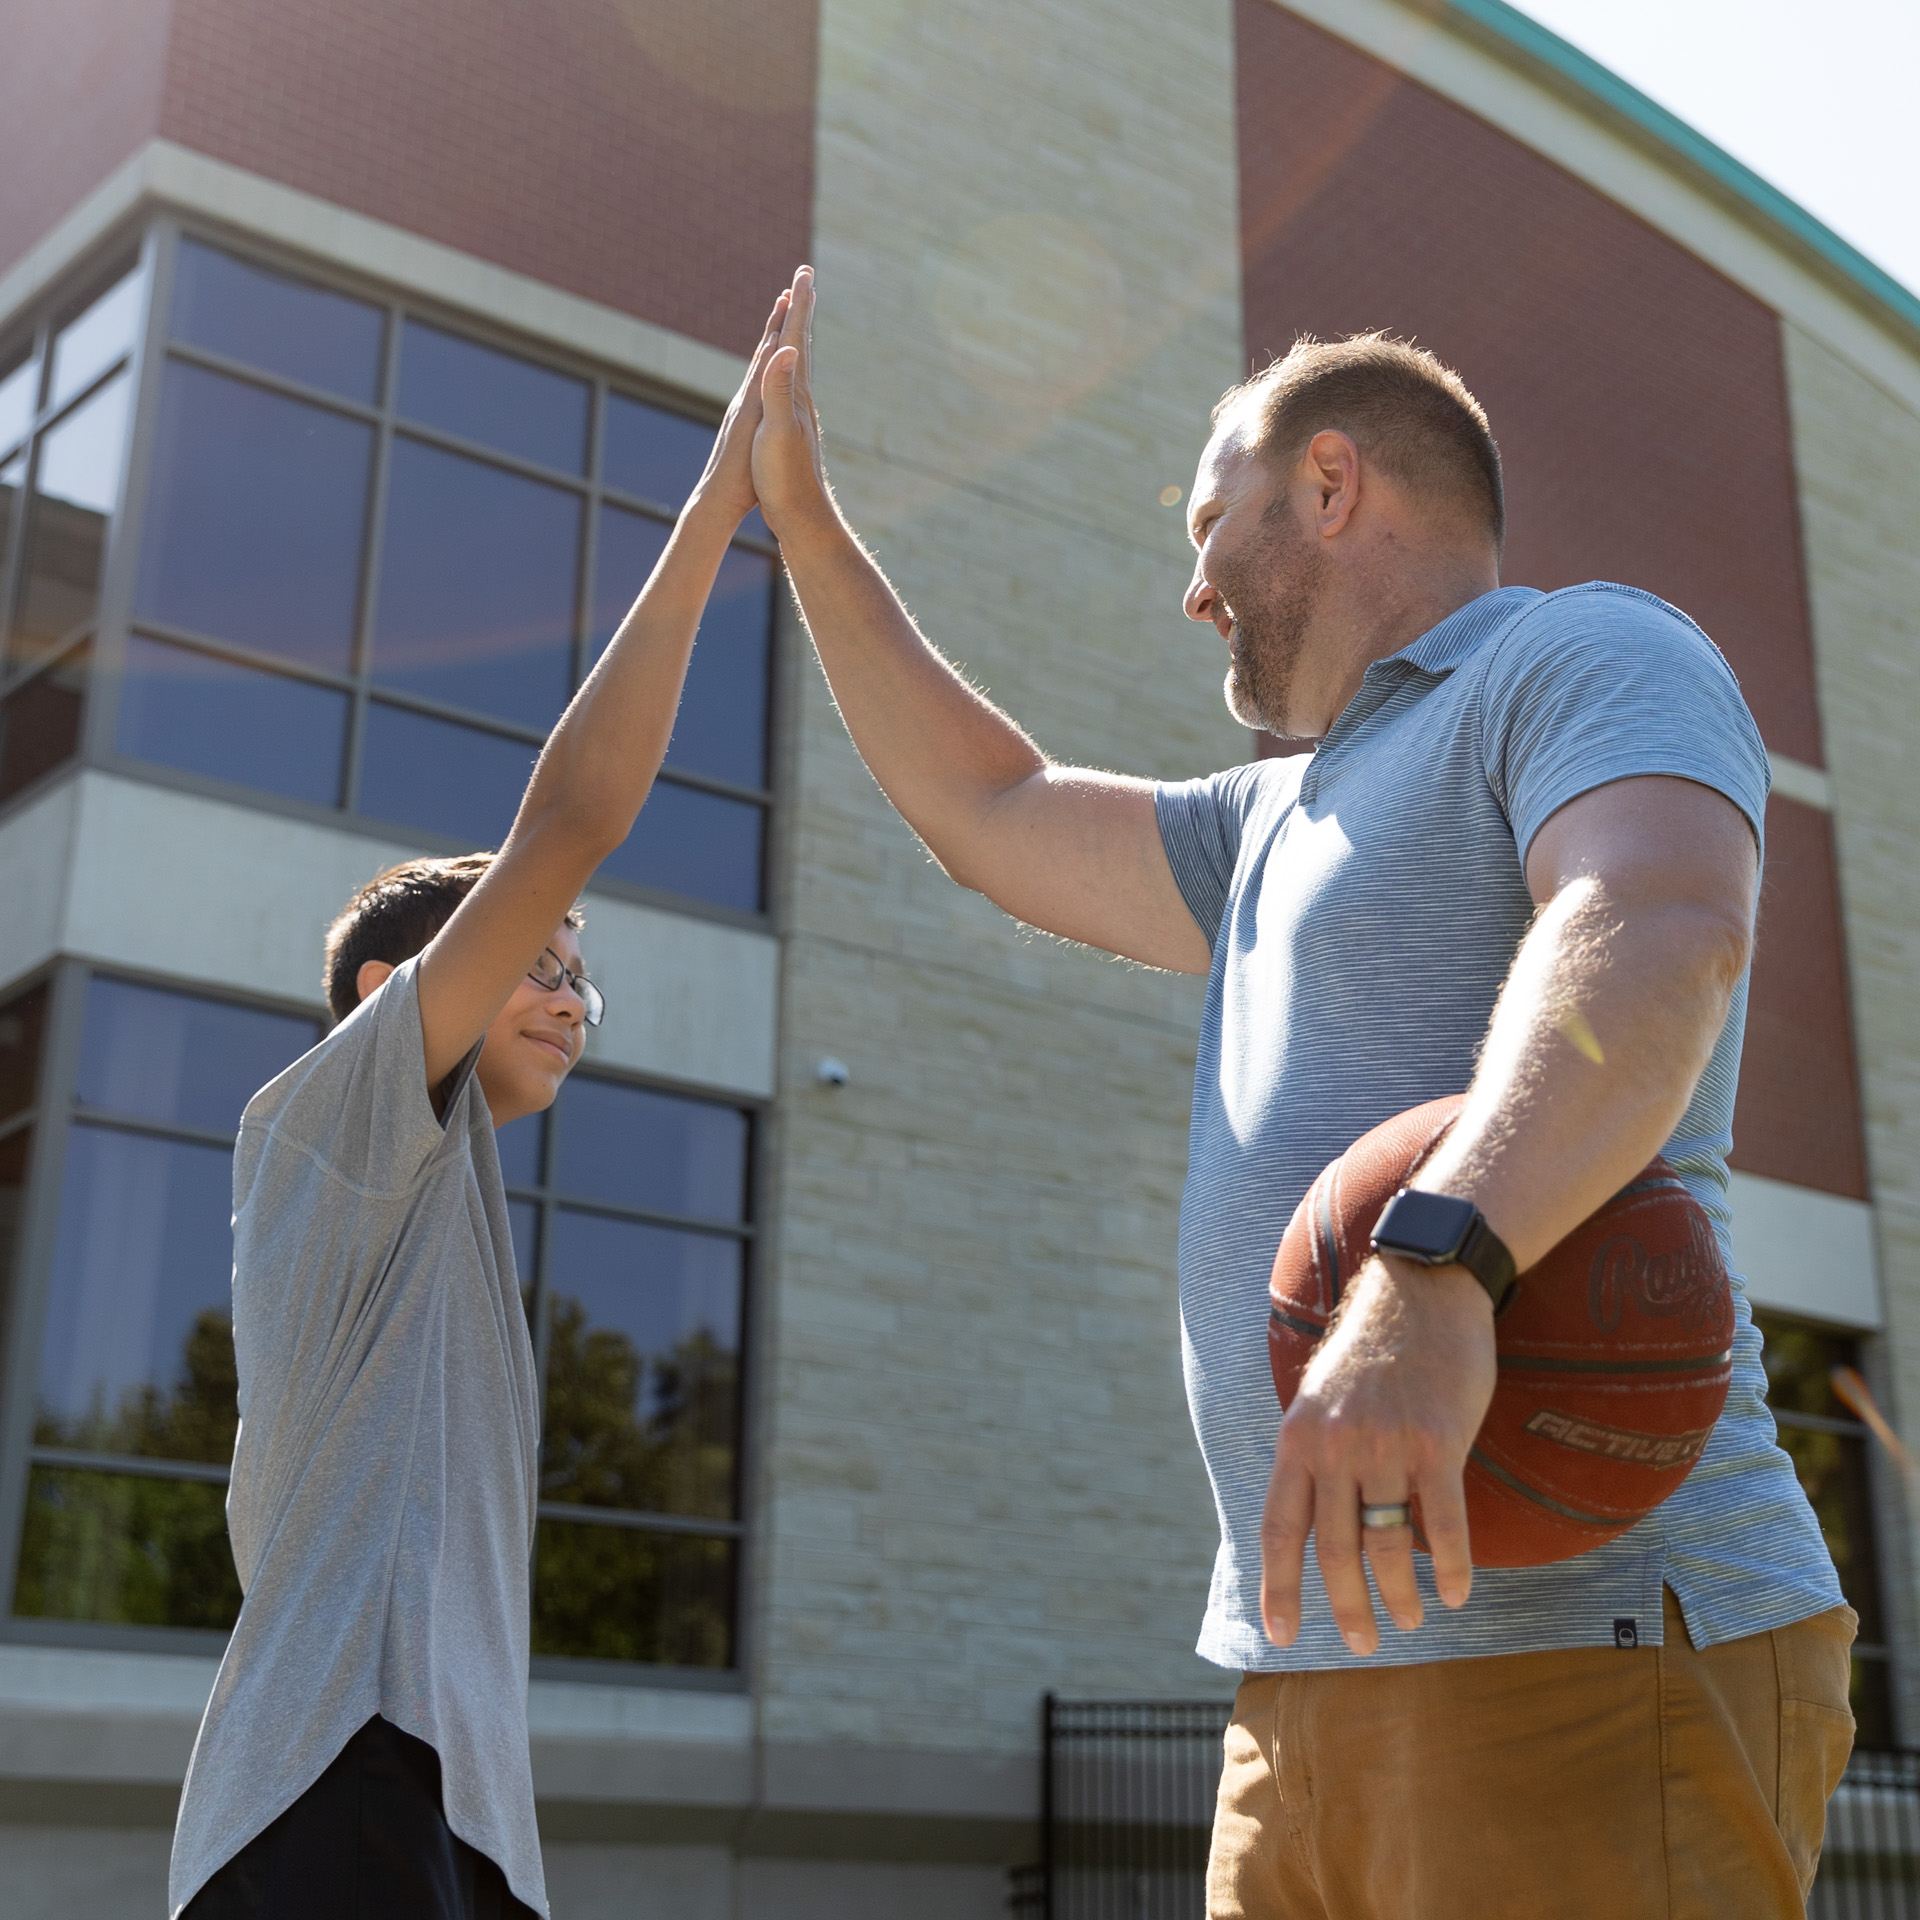 member of staff giving boy a high five while playing basketball